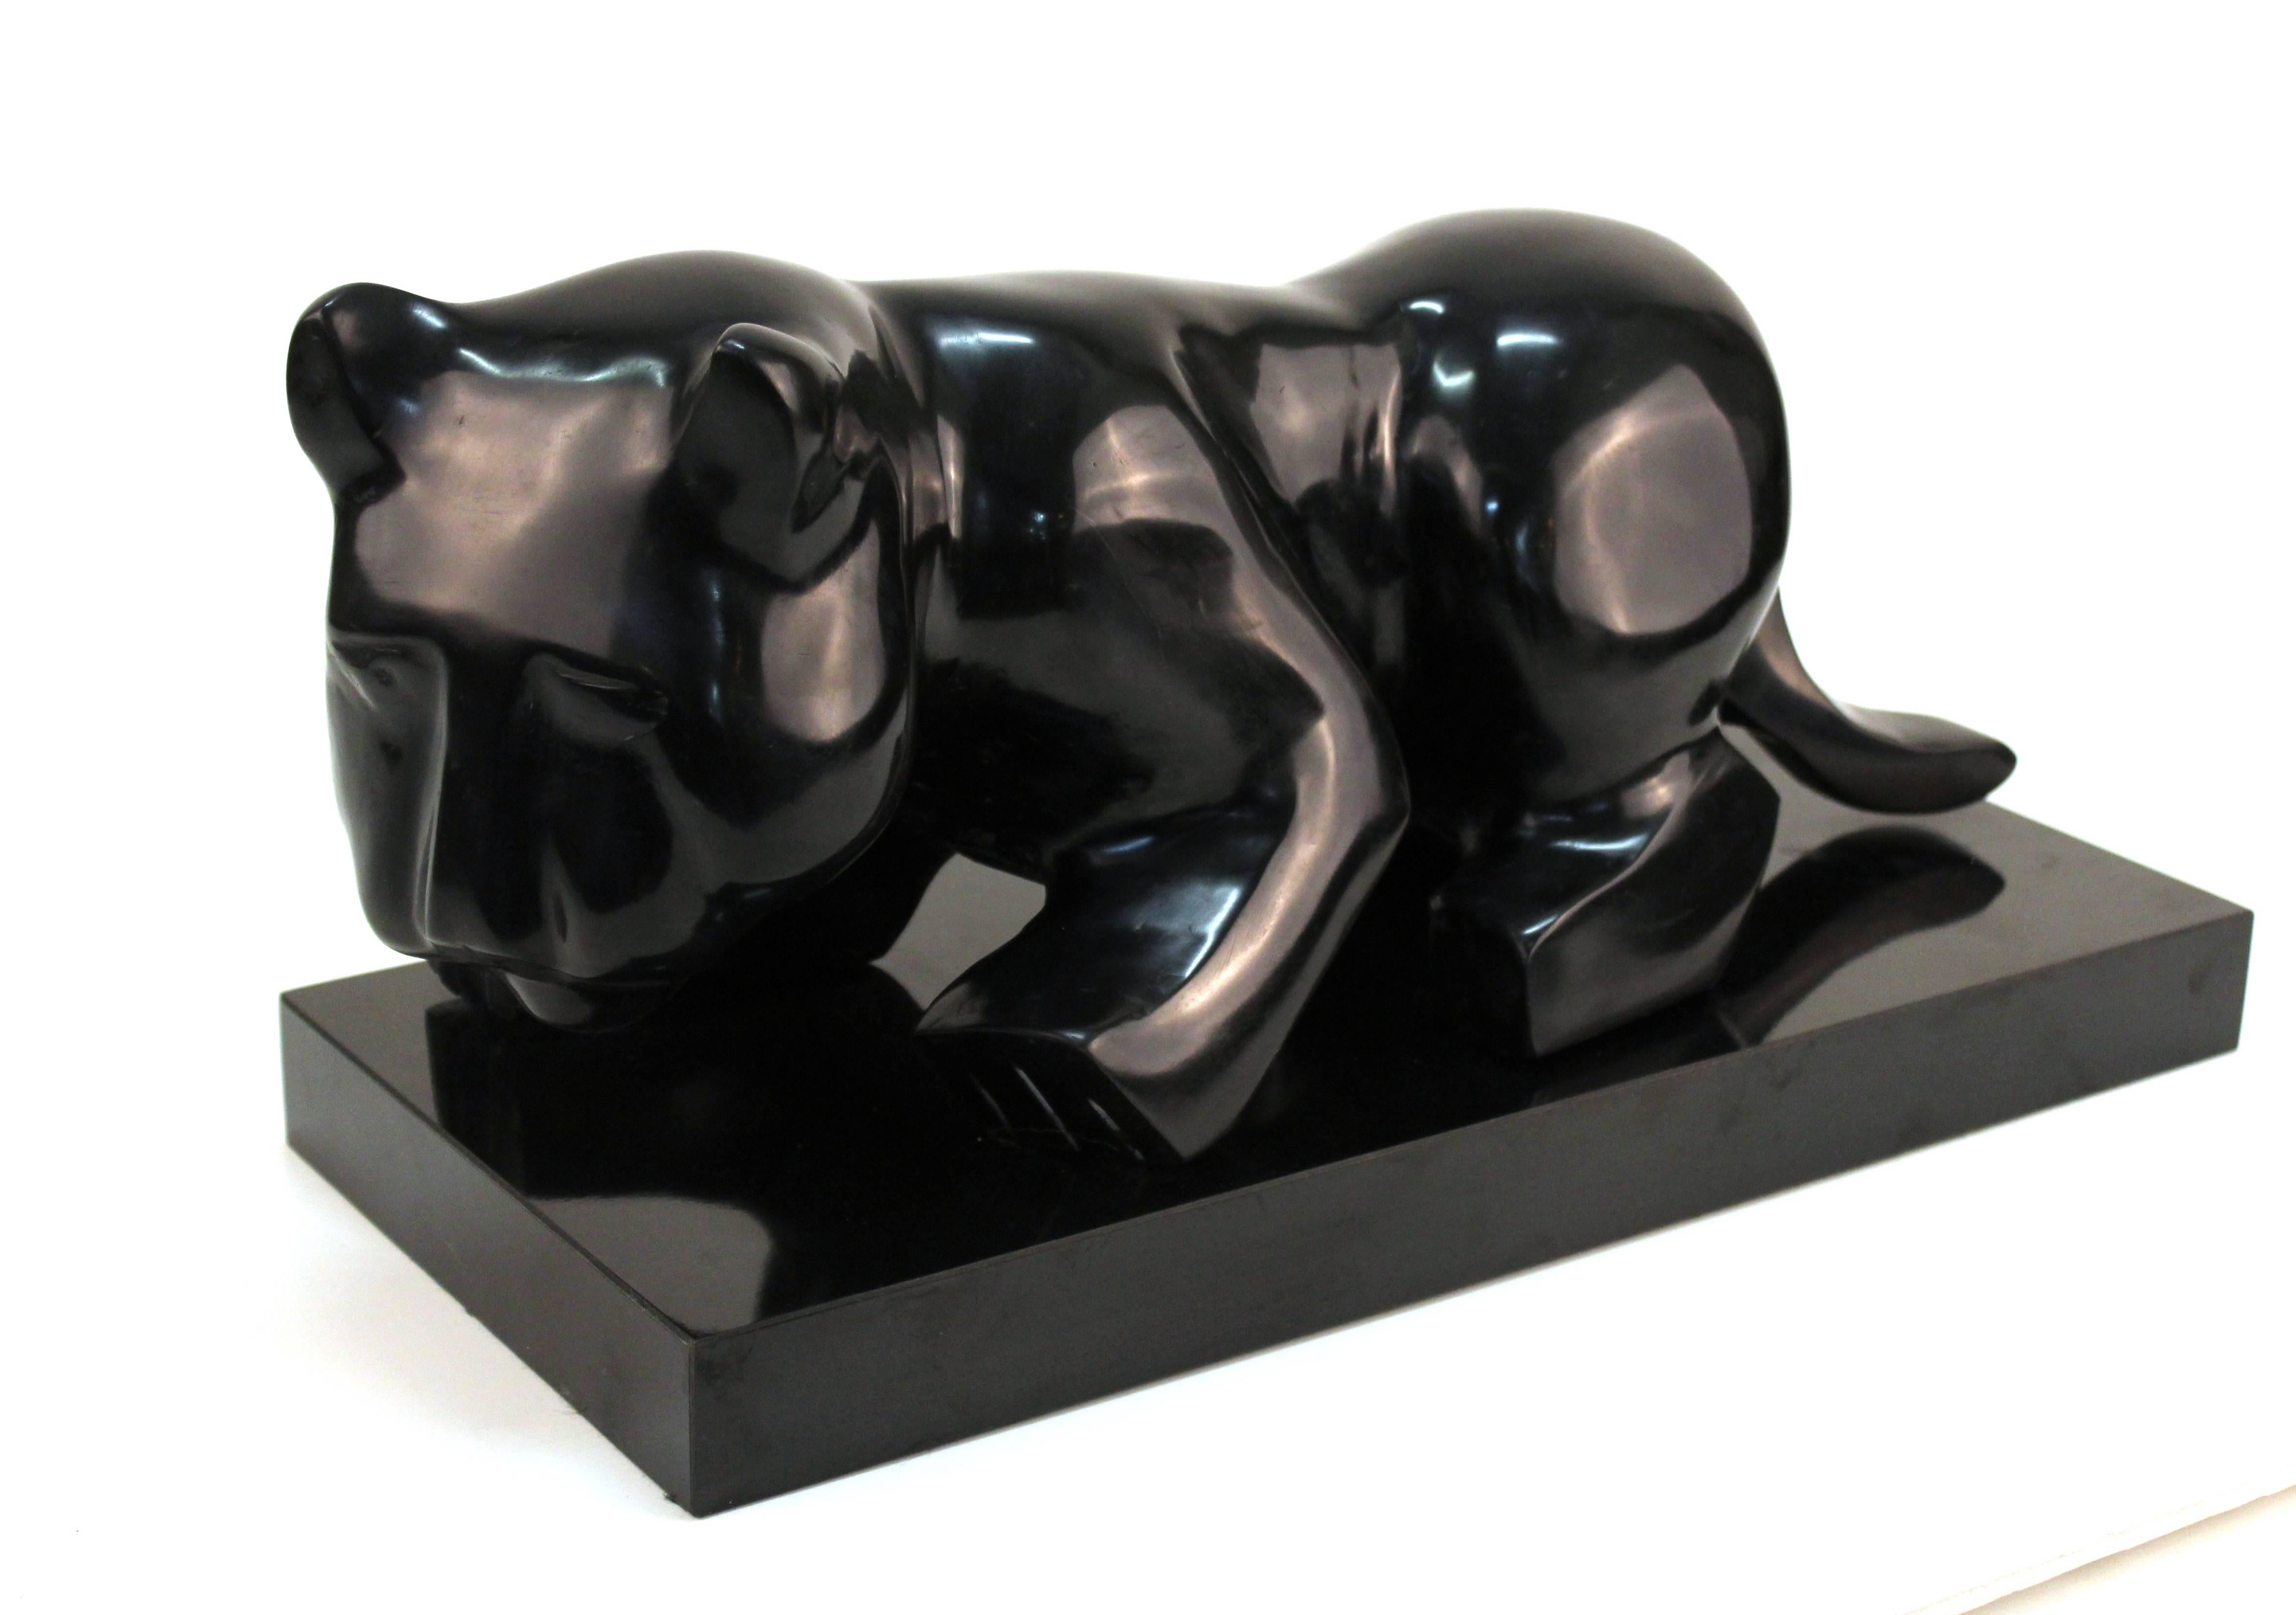 Cat sculpture on long rectangular stand. Made up of Minimalist geometric forms with a black glossy finish. Signed [N=]. Wear consistent with use. The piece is in good condition.